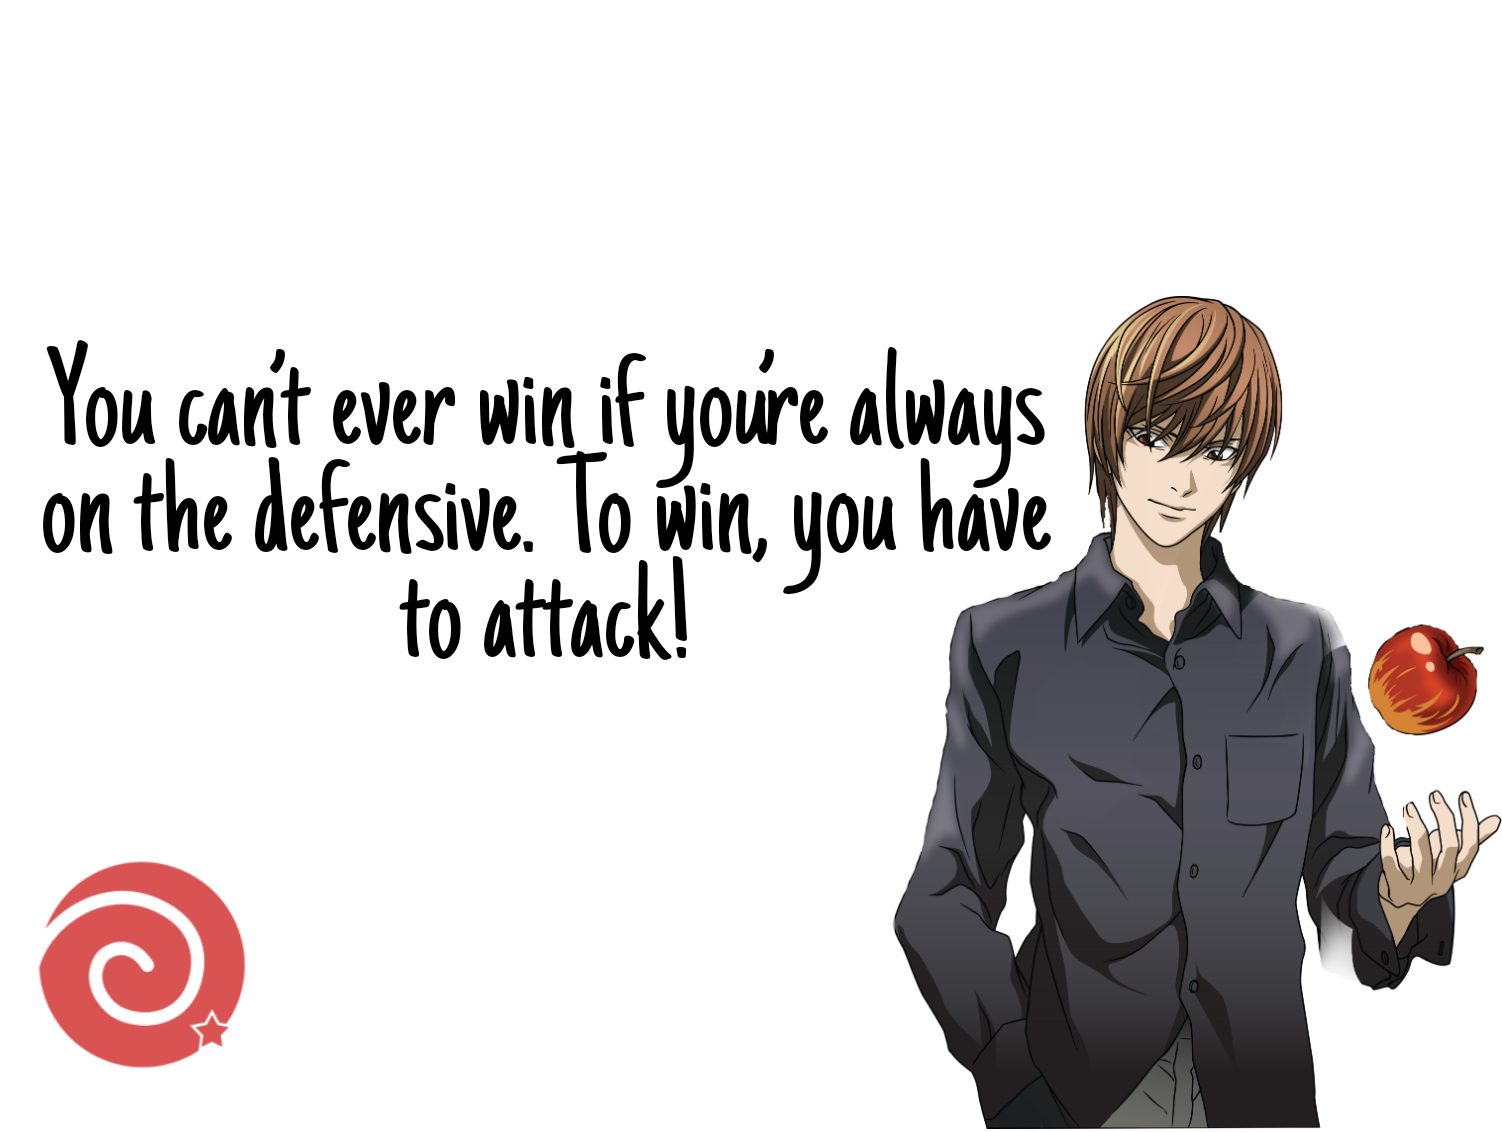 Light yagami quotes from Death Note